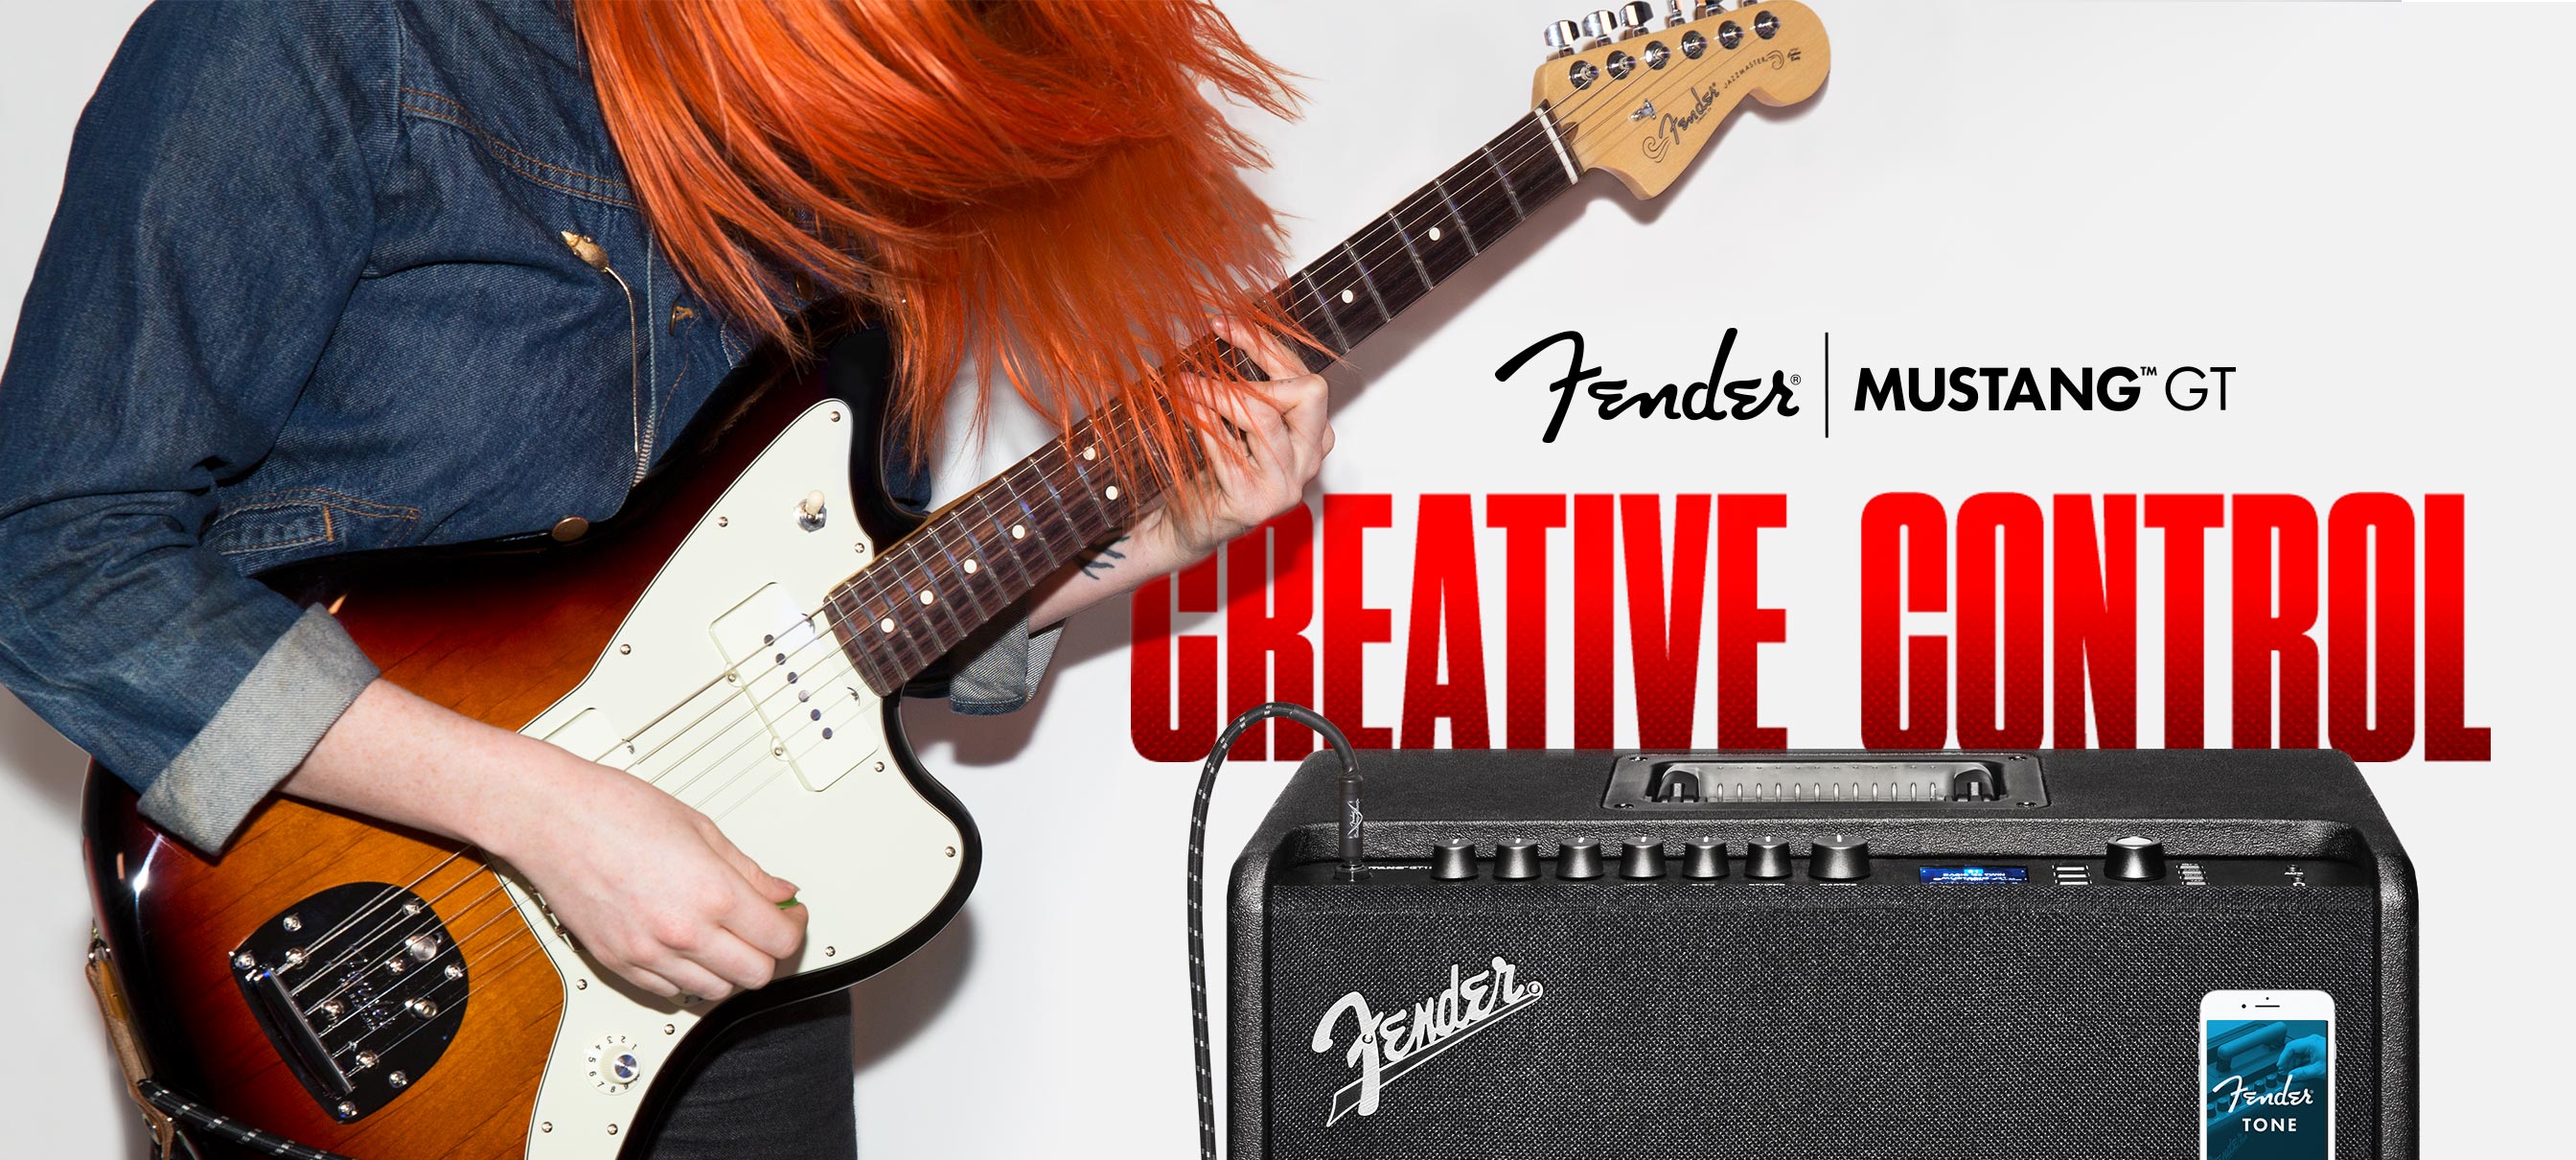 Fender unveil WiFi and Bluetooth in amps with their new Mustang GT series